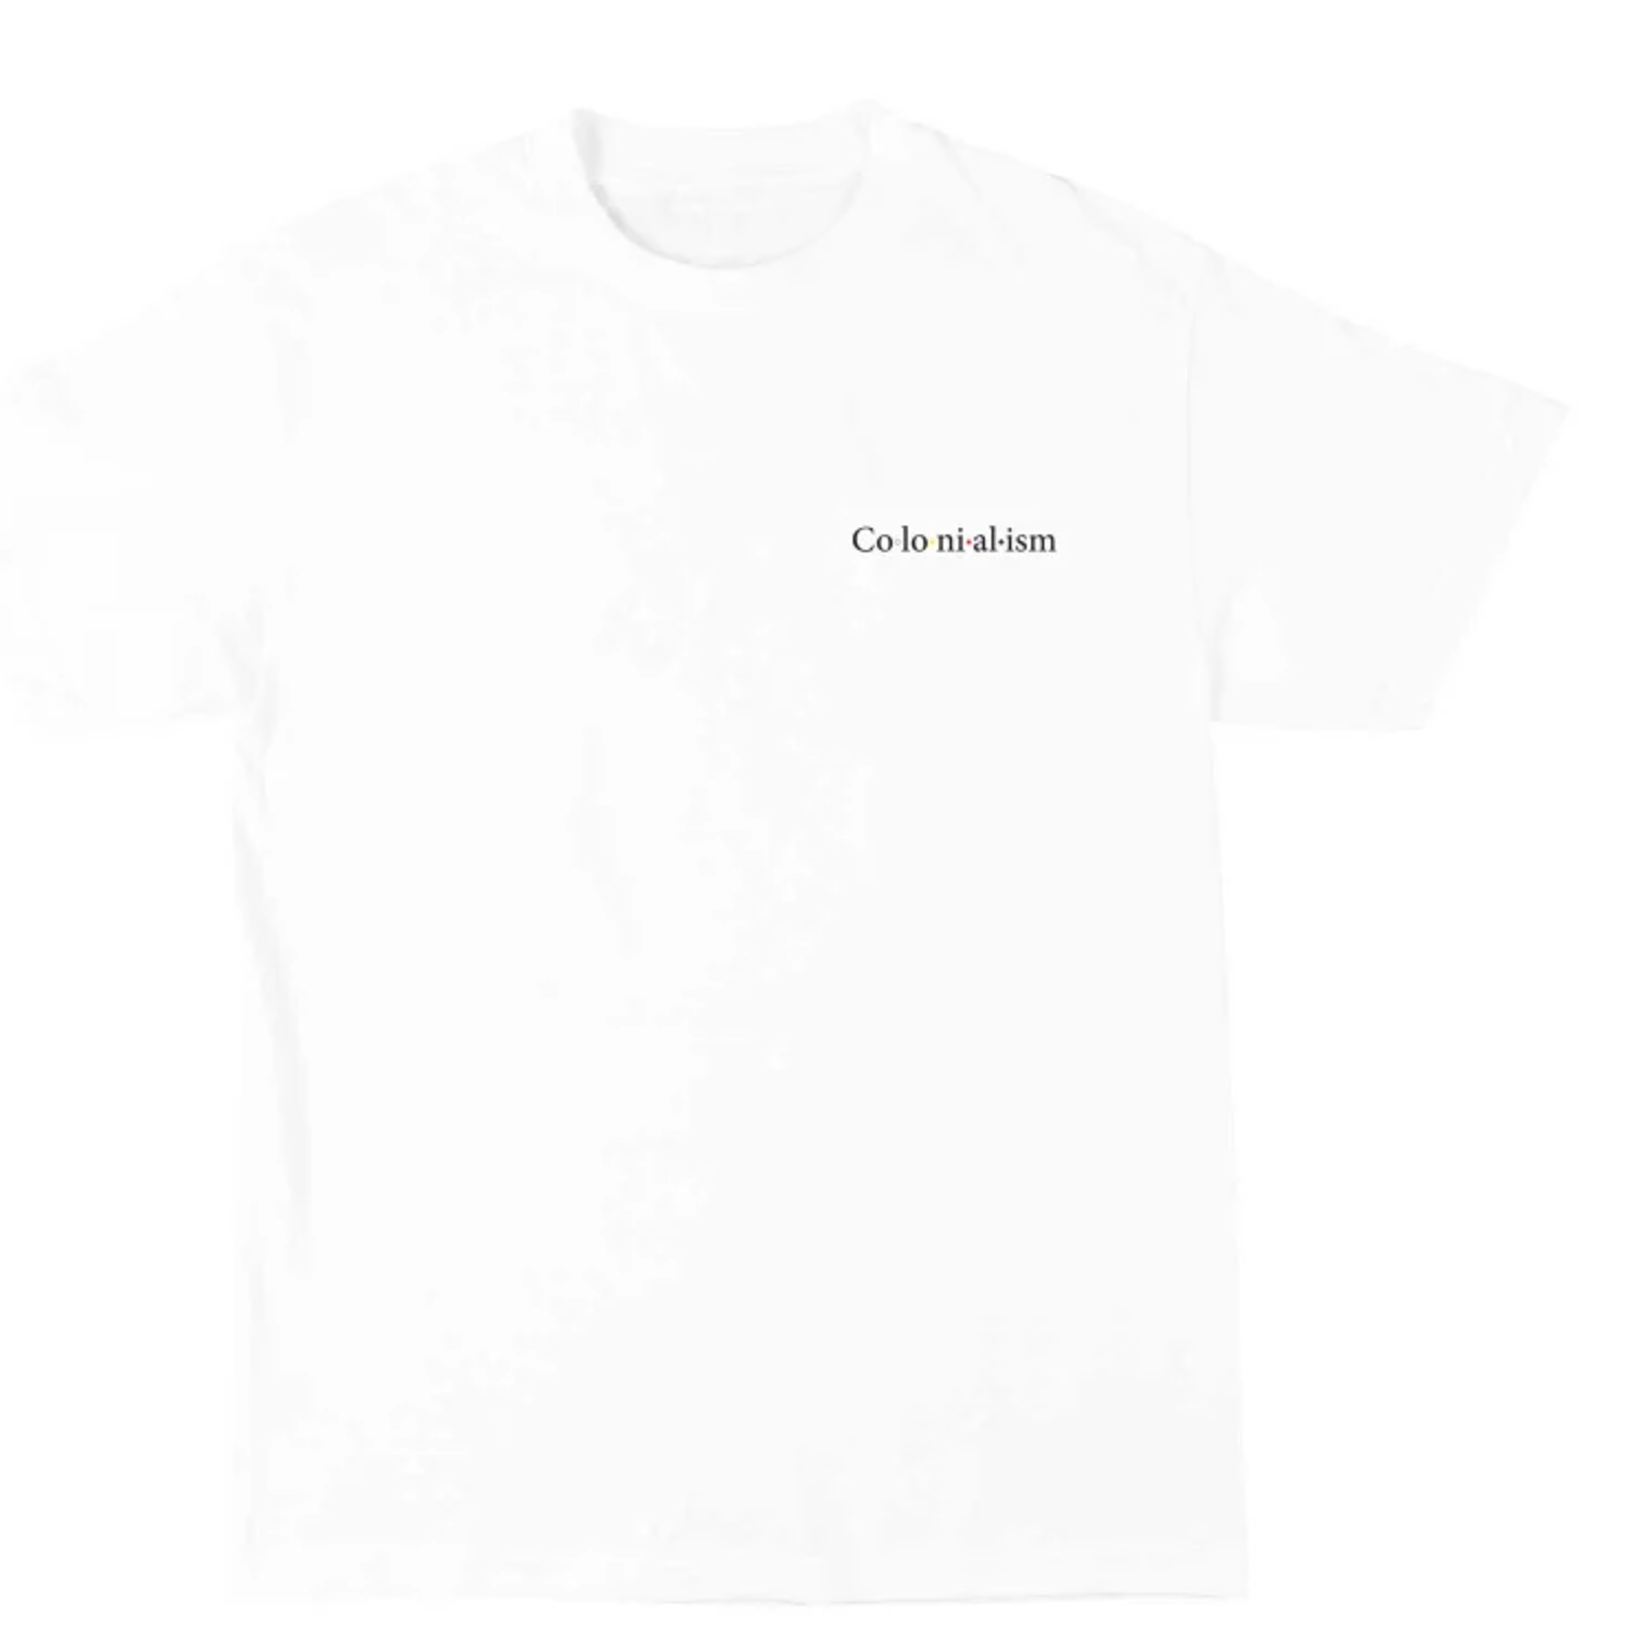 Colonialism Colonialism Syllable Tee